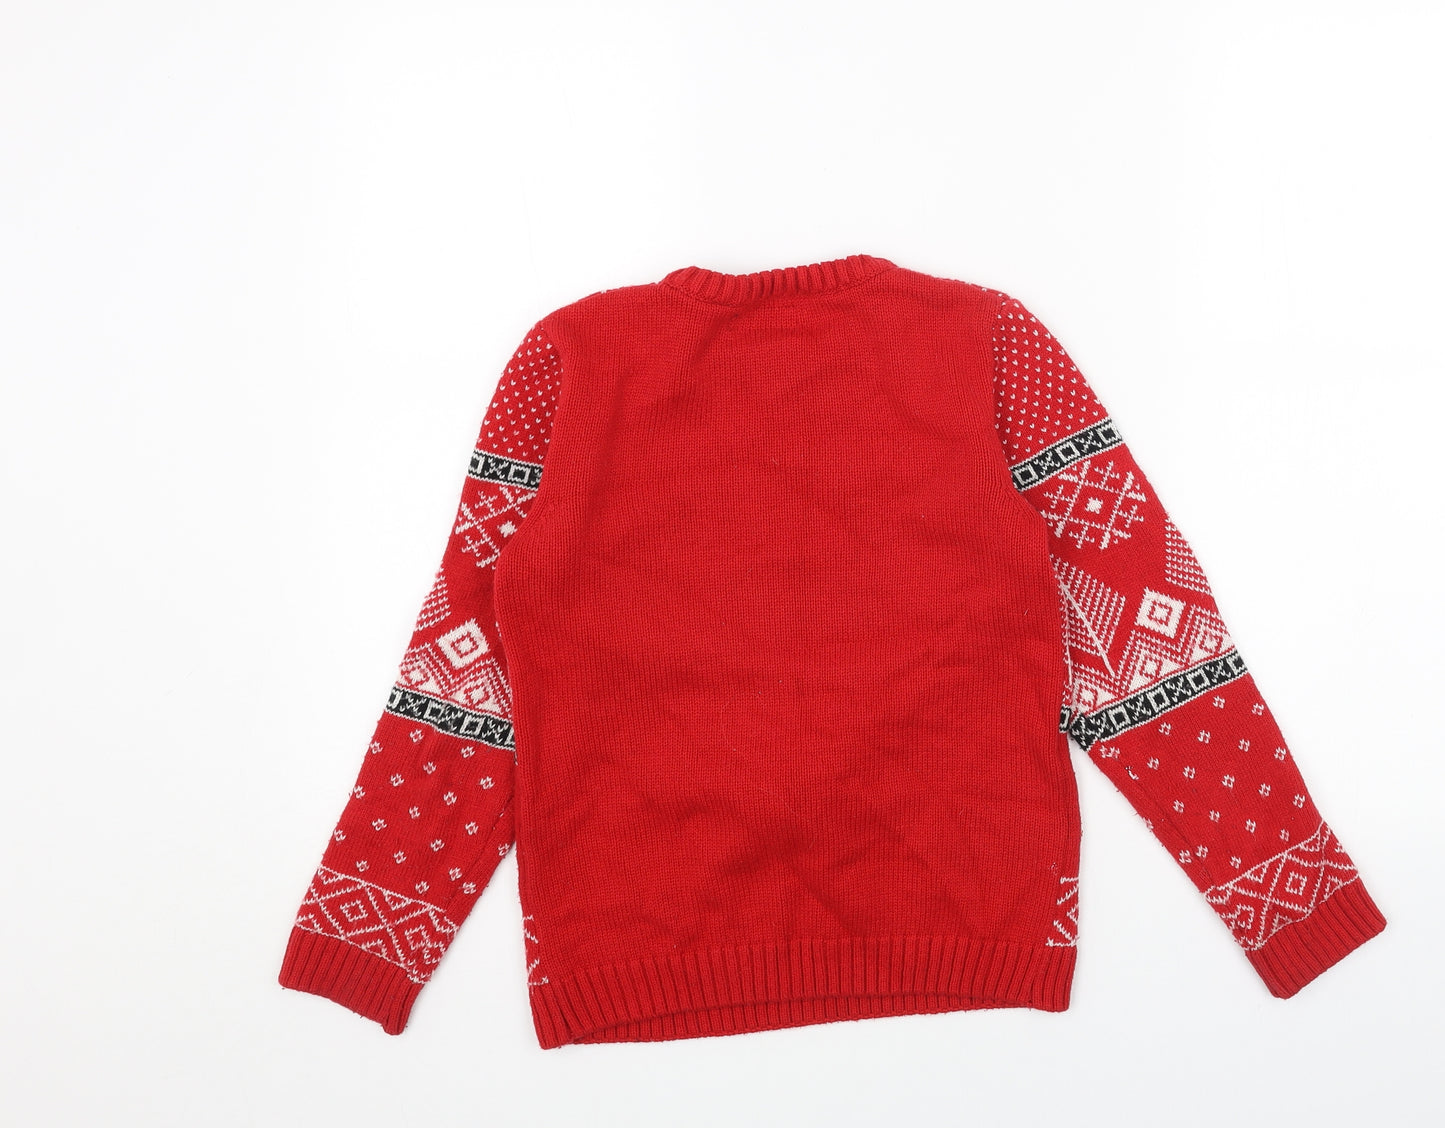 NEXT Boys Red Round Neck Fair Isle Acrylic Pullover Jumper Size 9 Years Pullover - Christmas Reindeer